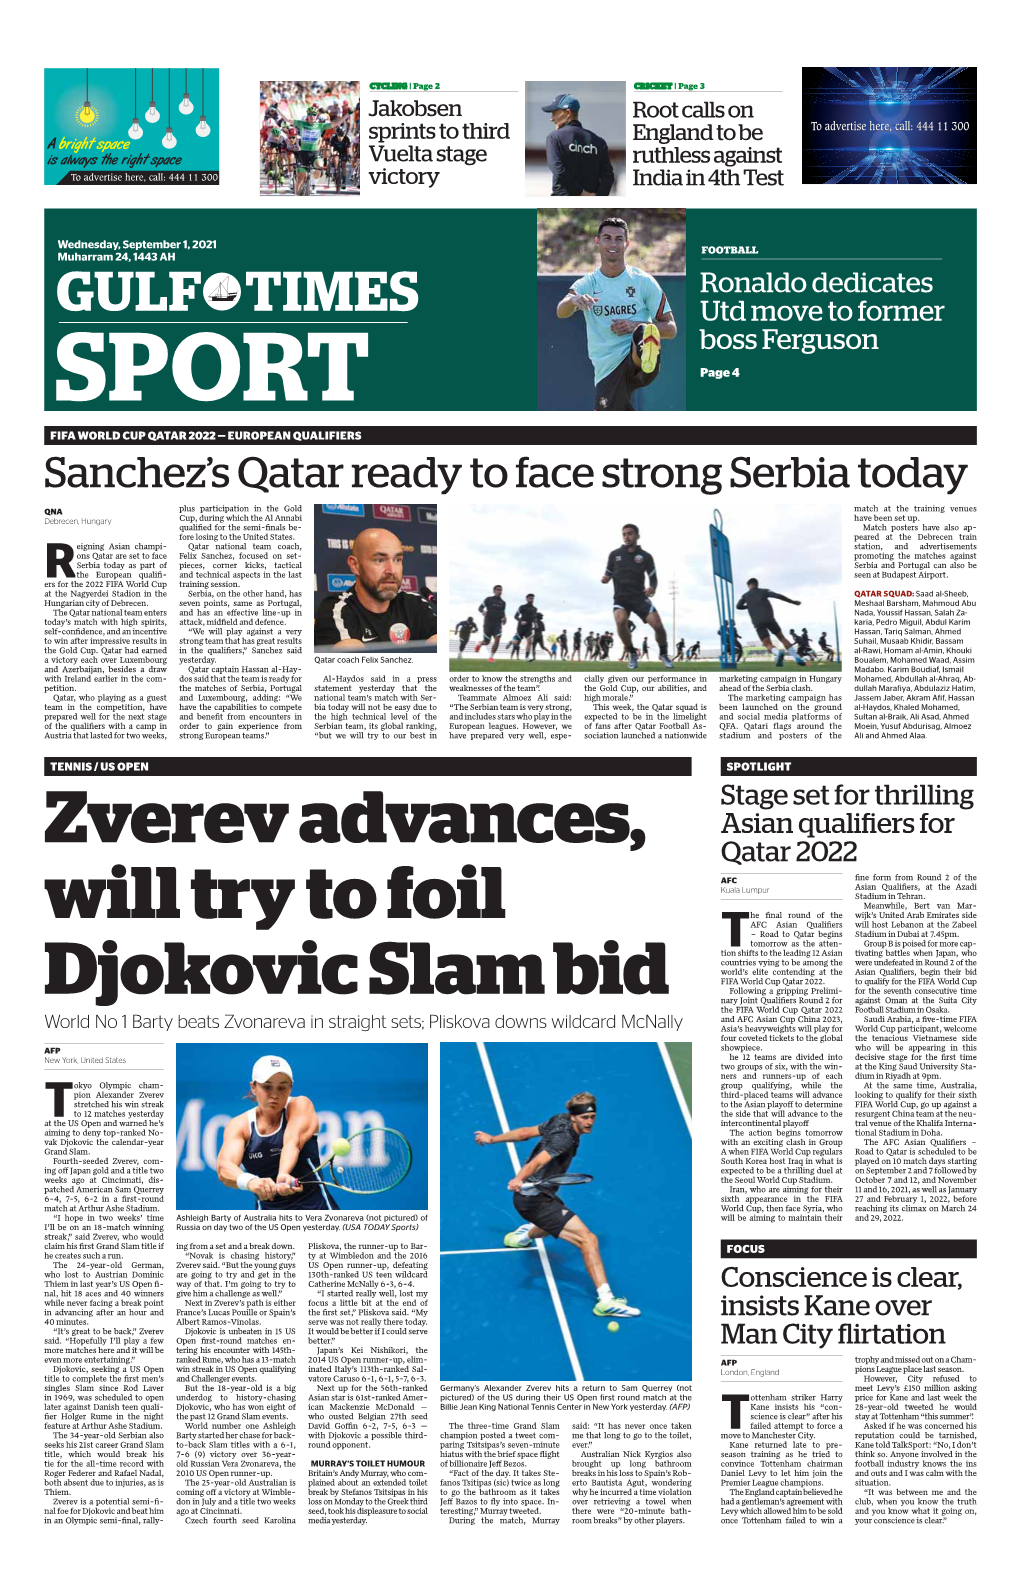 SPORT Page 4 FIFA WORLD CUP QATAR 2022 — EUROPEAN QUALIFIERS Sanchez’S Qatar Ready to Face Strong Serbia Today